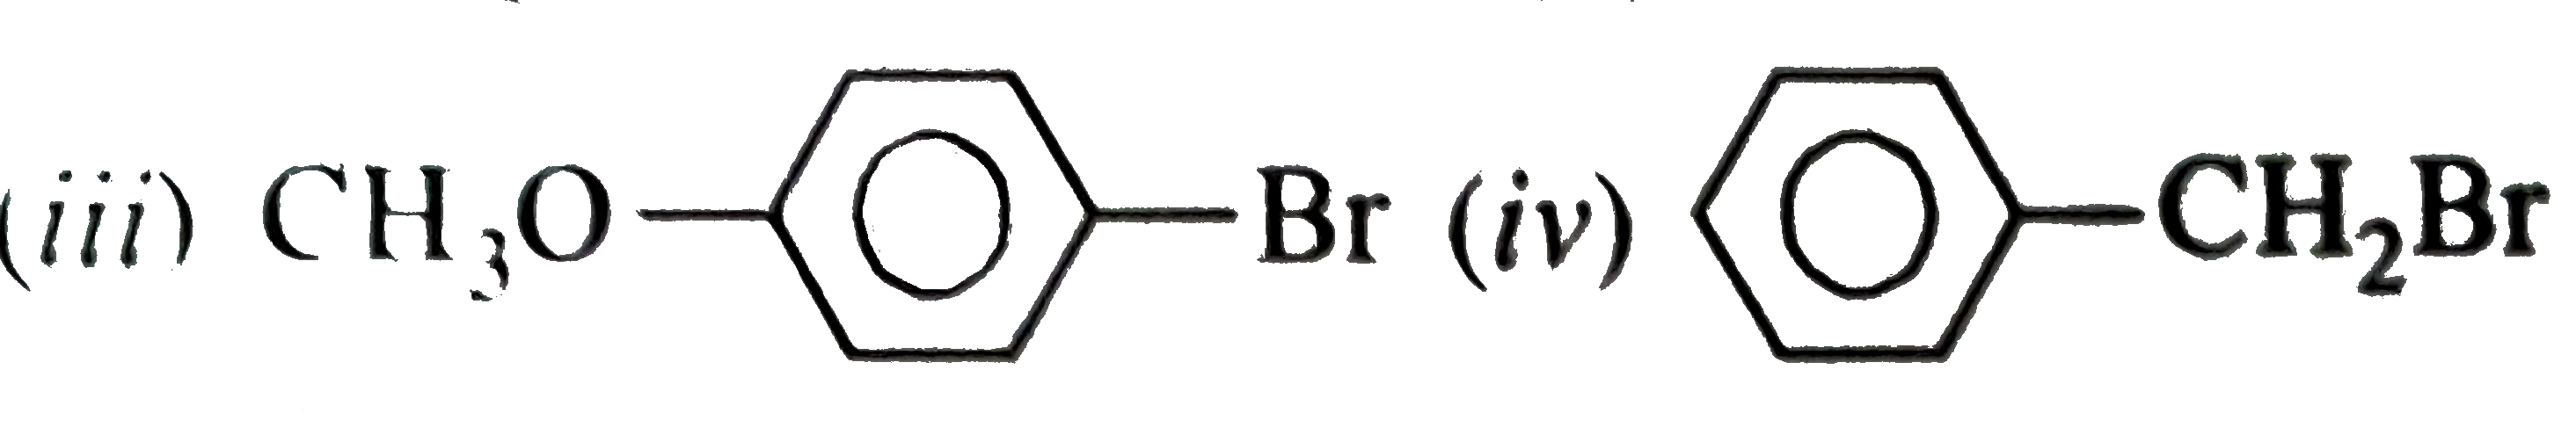 The correct order of reactivity of following compounds in nucleophilic substitution reaction is   (i) CH(3)Br   (ii)  CH(3)Cl